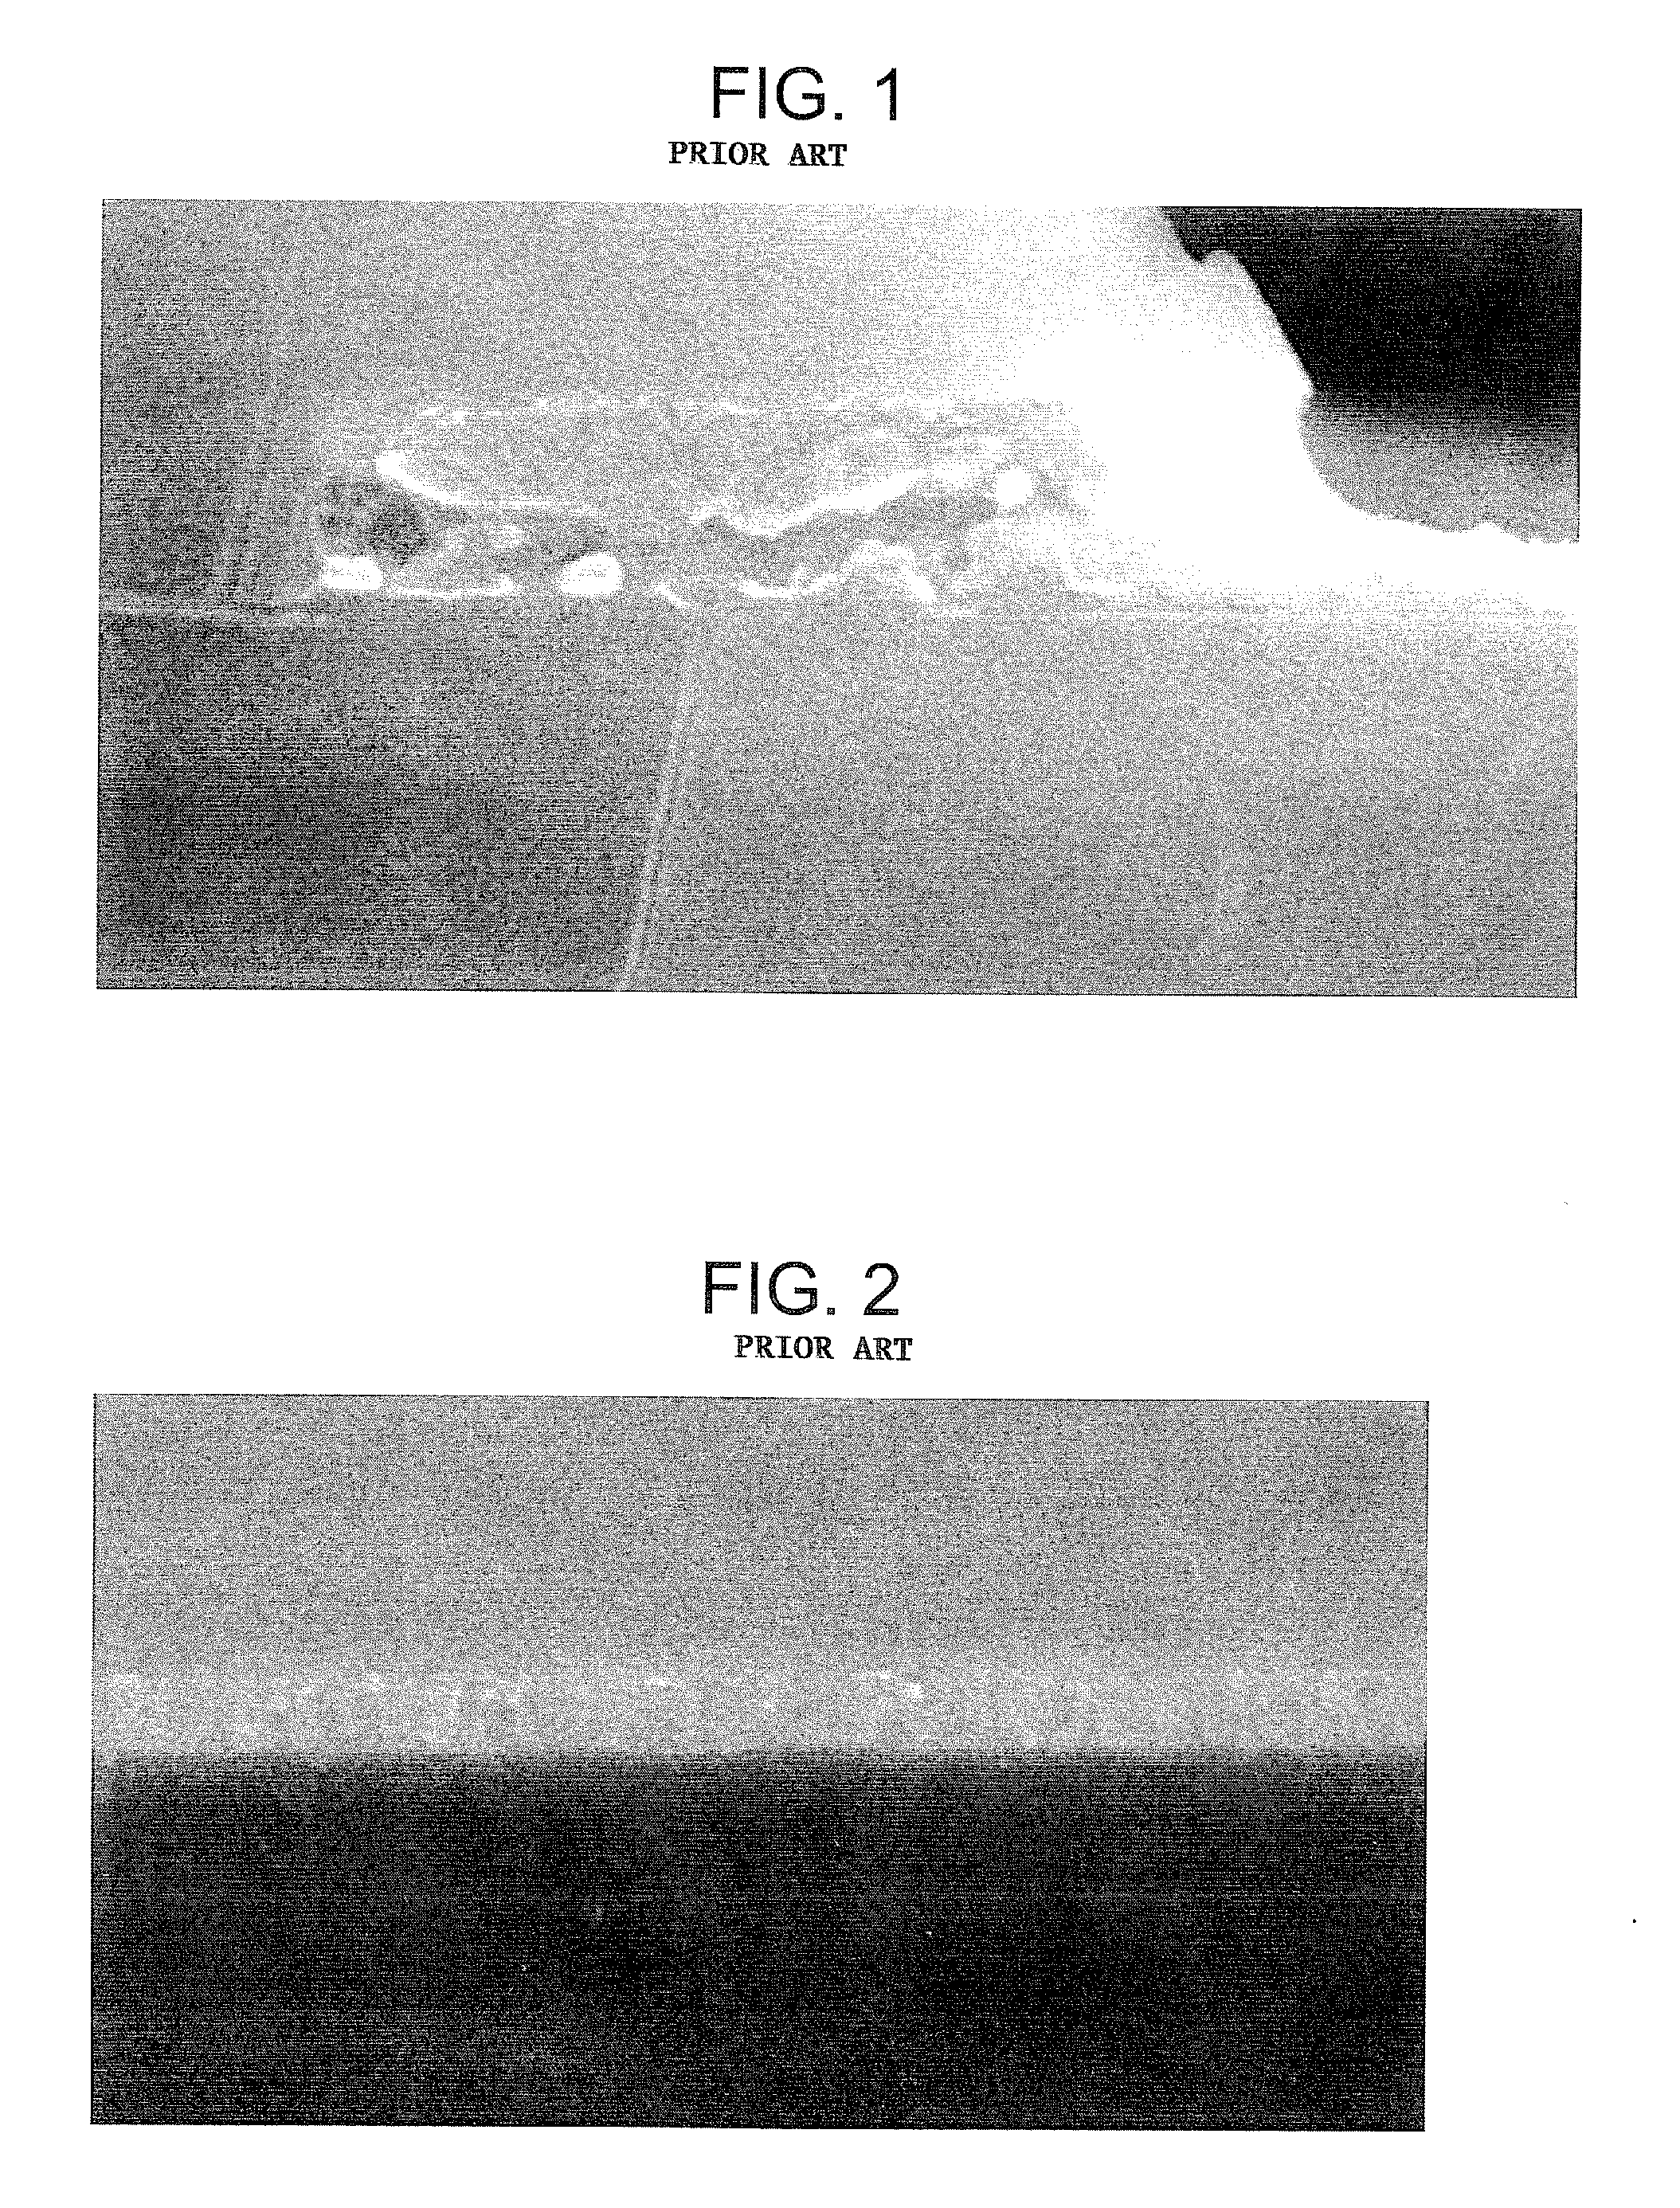 Gate structures in semiconductor devices